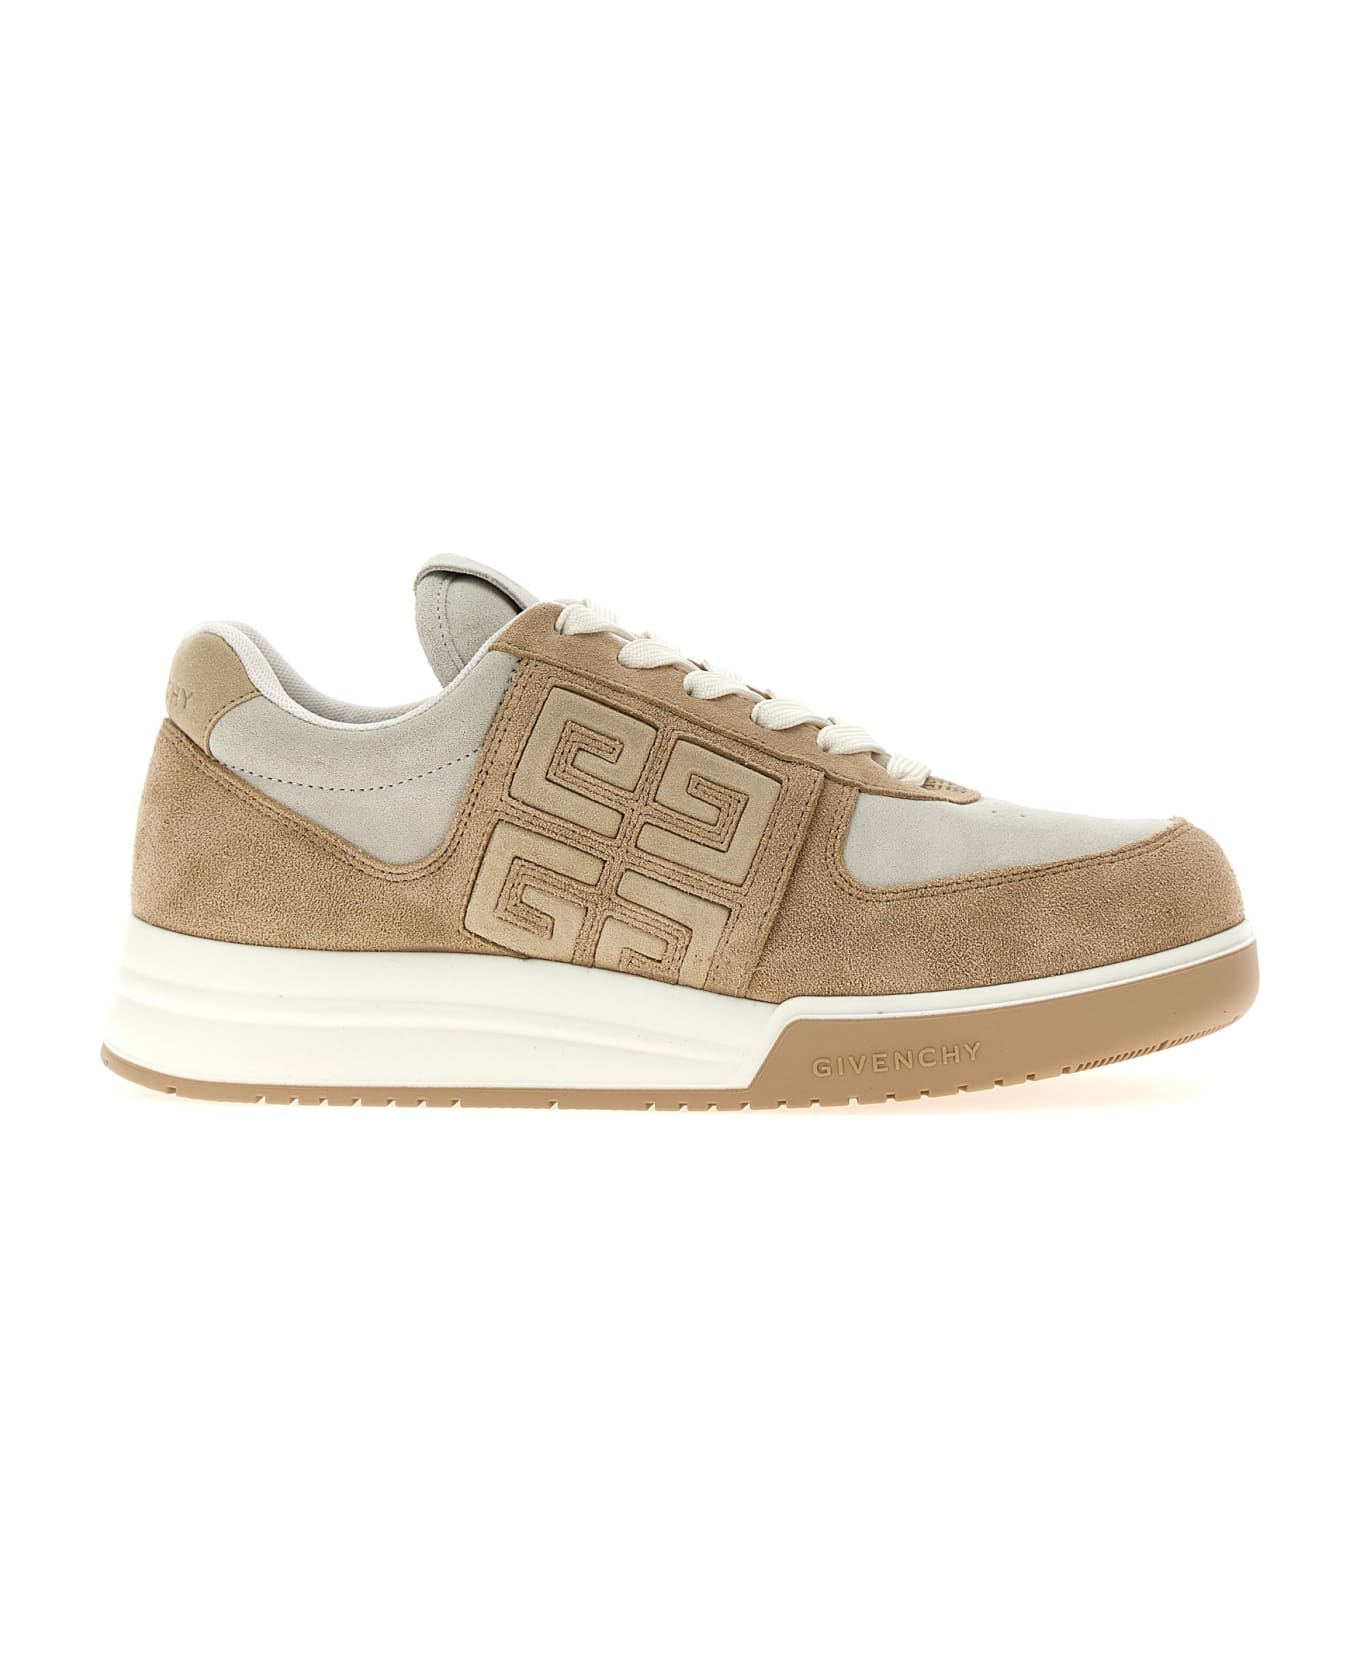 Givenchy G4 Low Sneakers - BEIGE/WHITE スニーカー